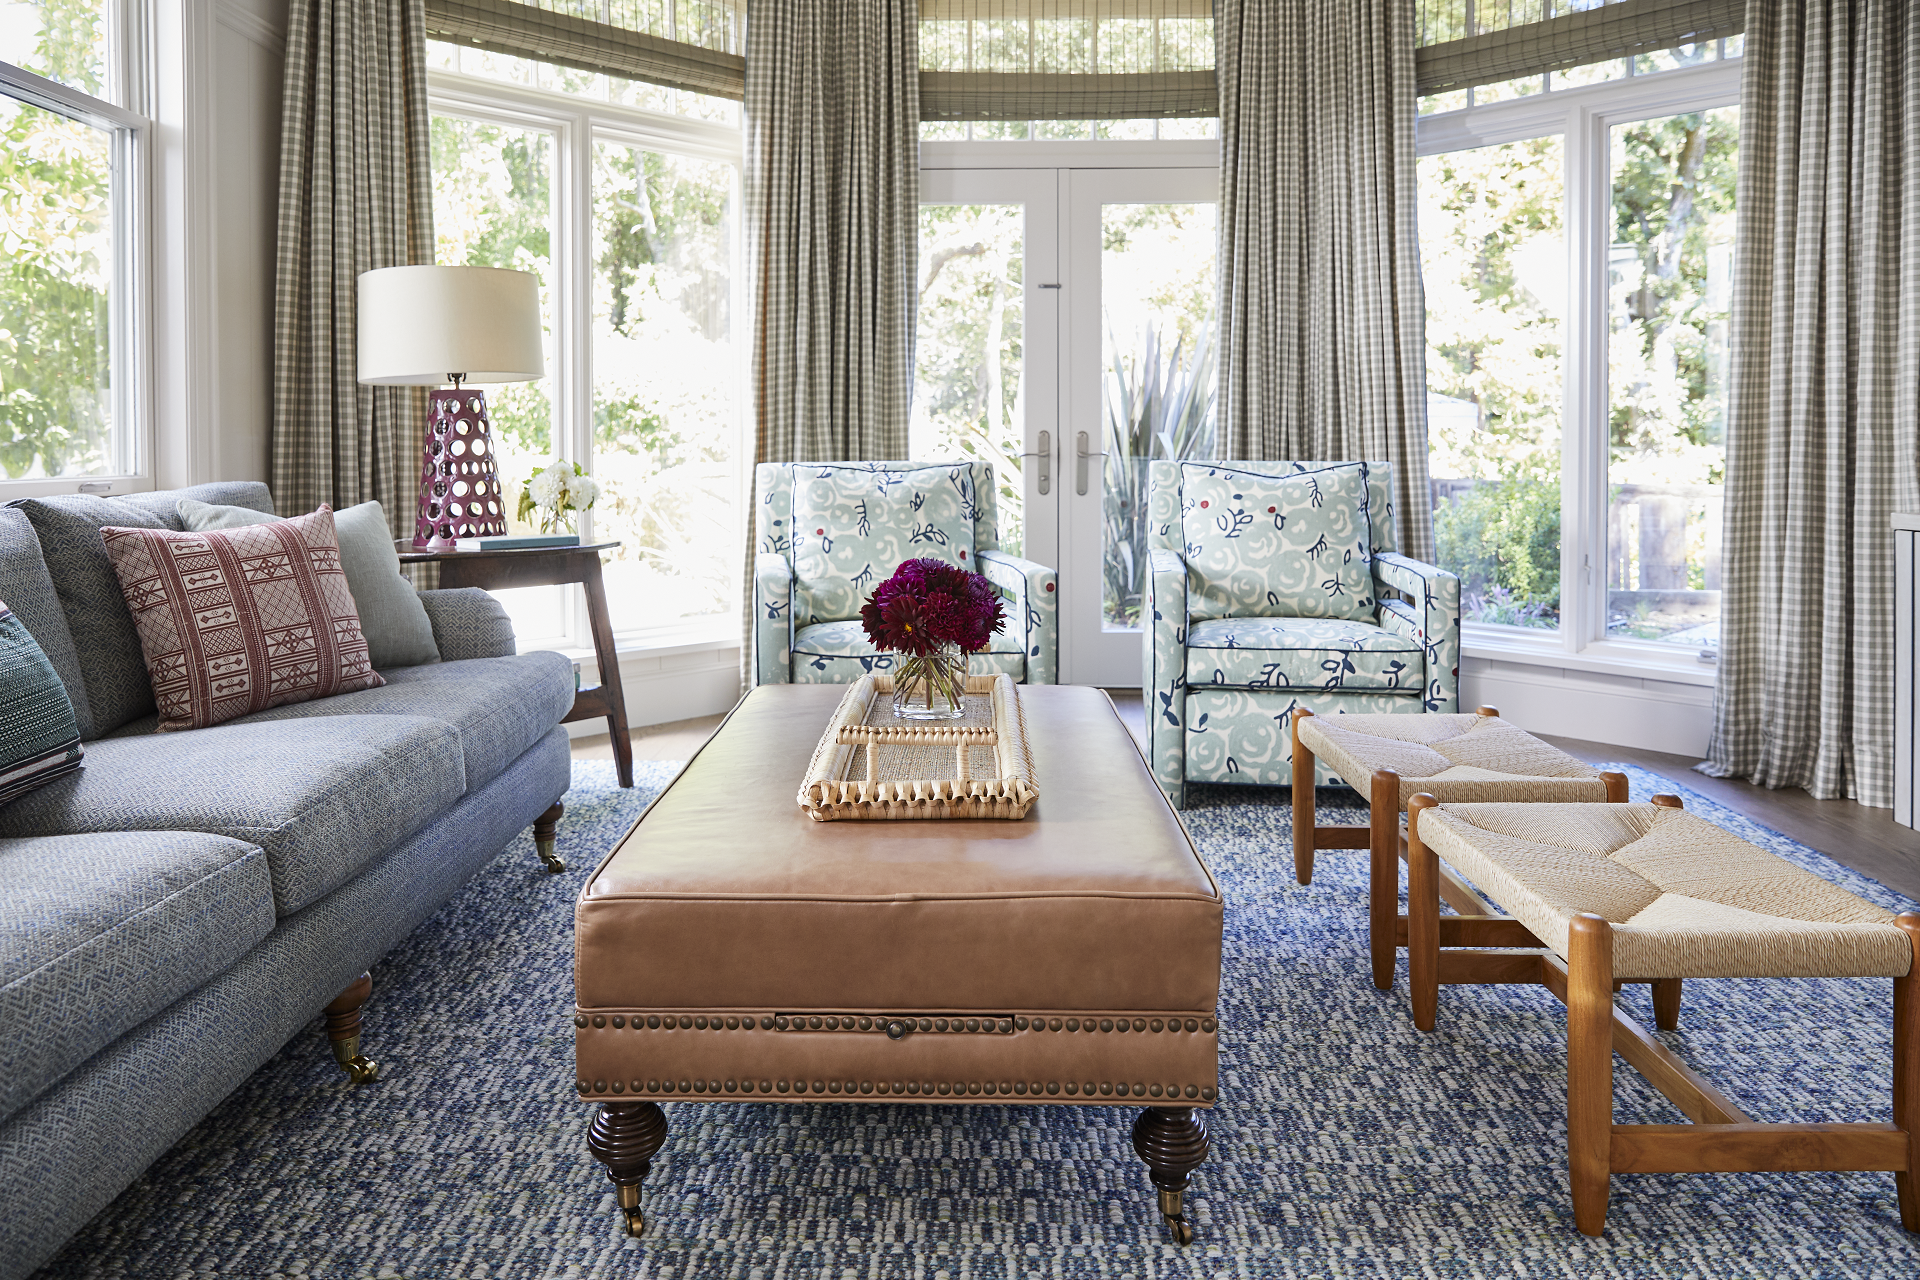 Checkered roman shades and pleated drapes with woven shades and upholstered seating different angle